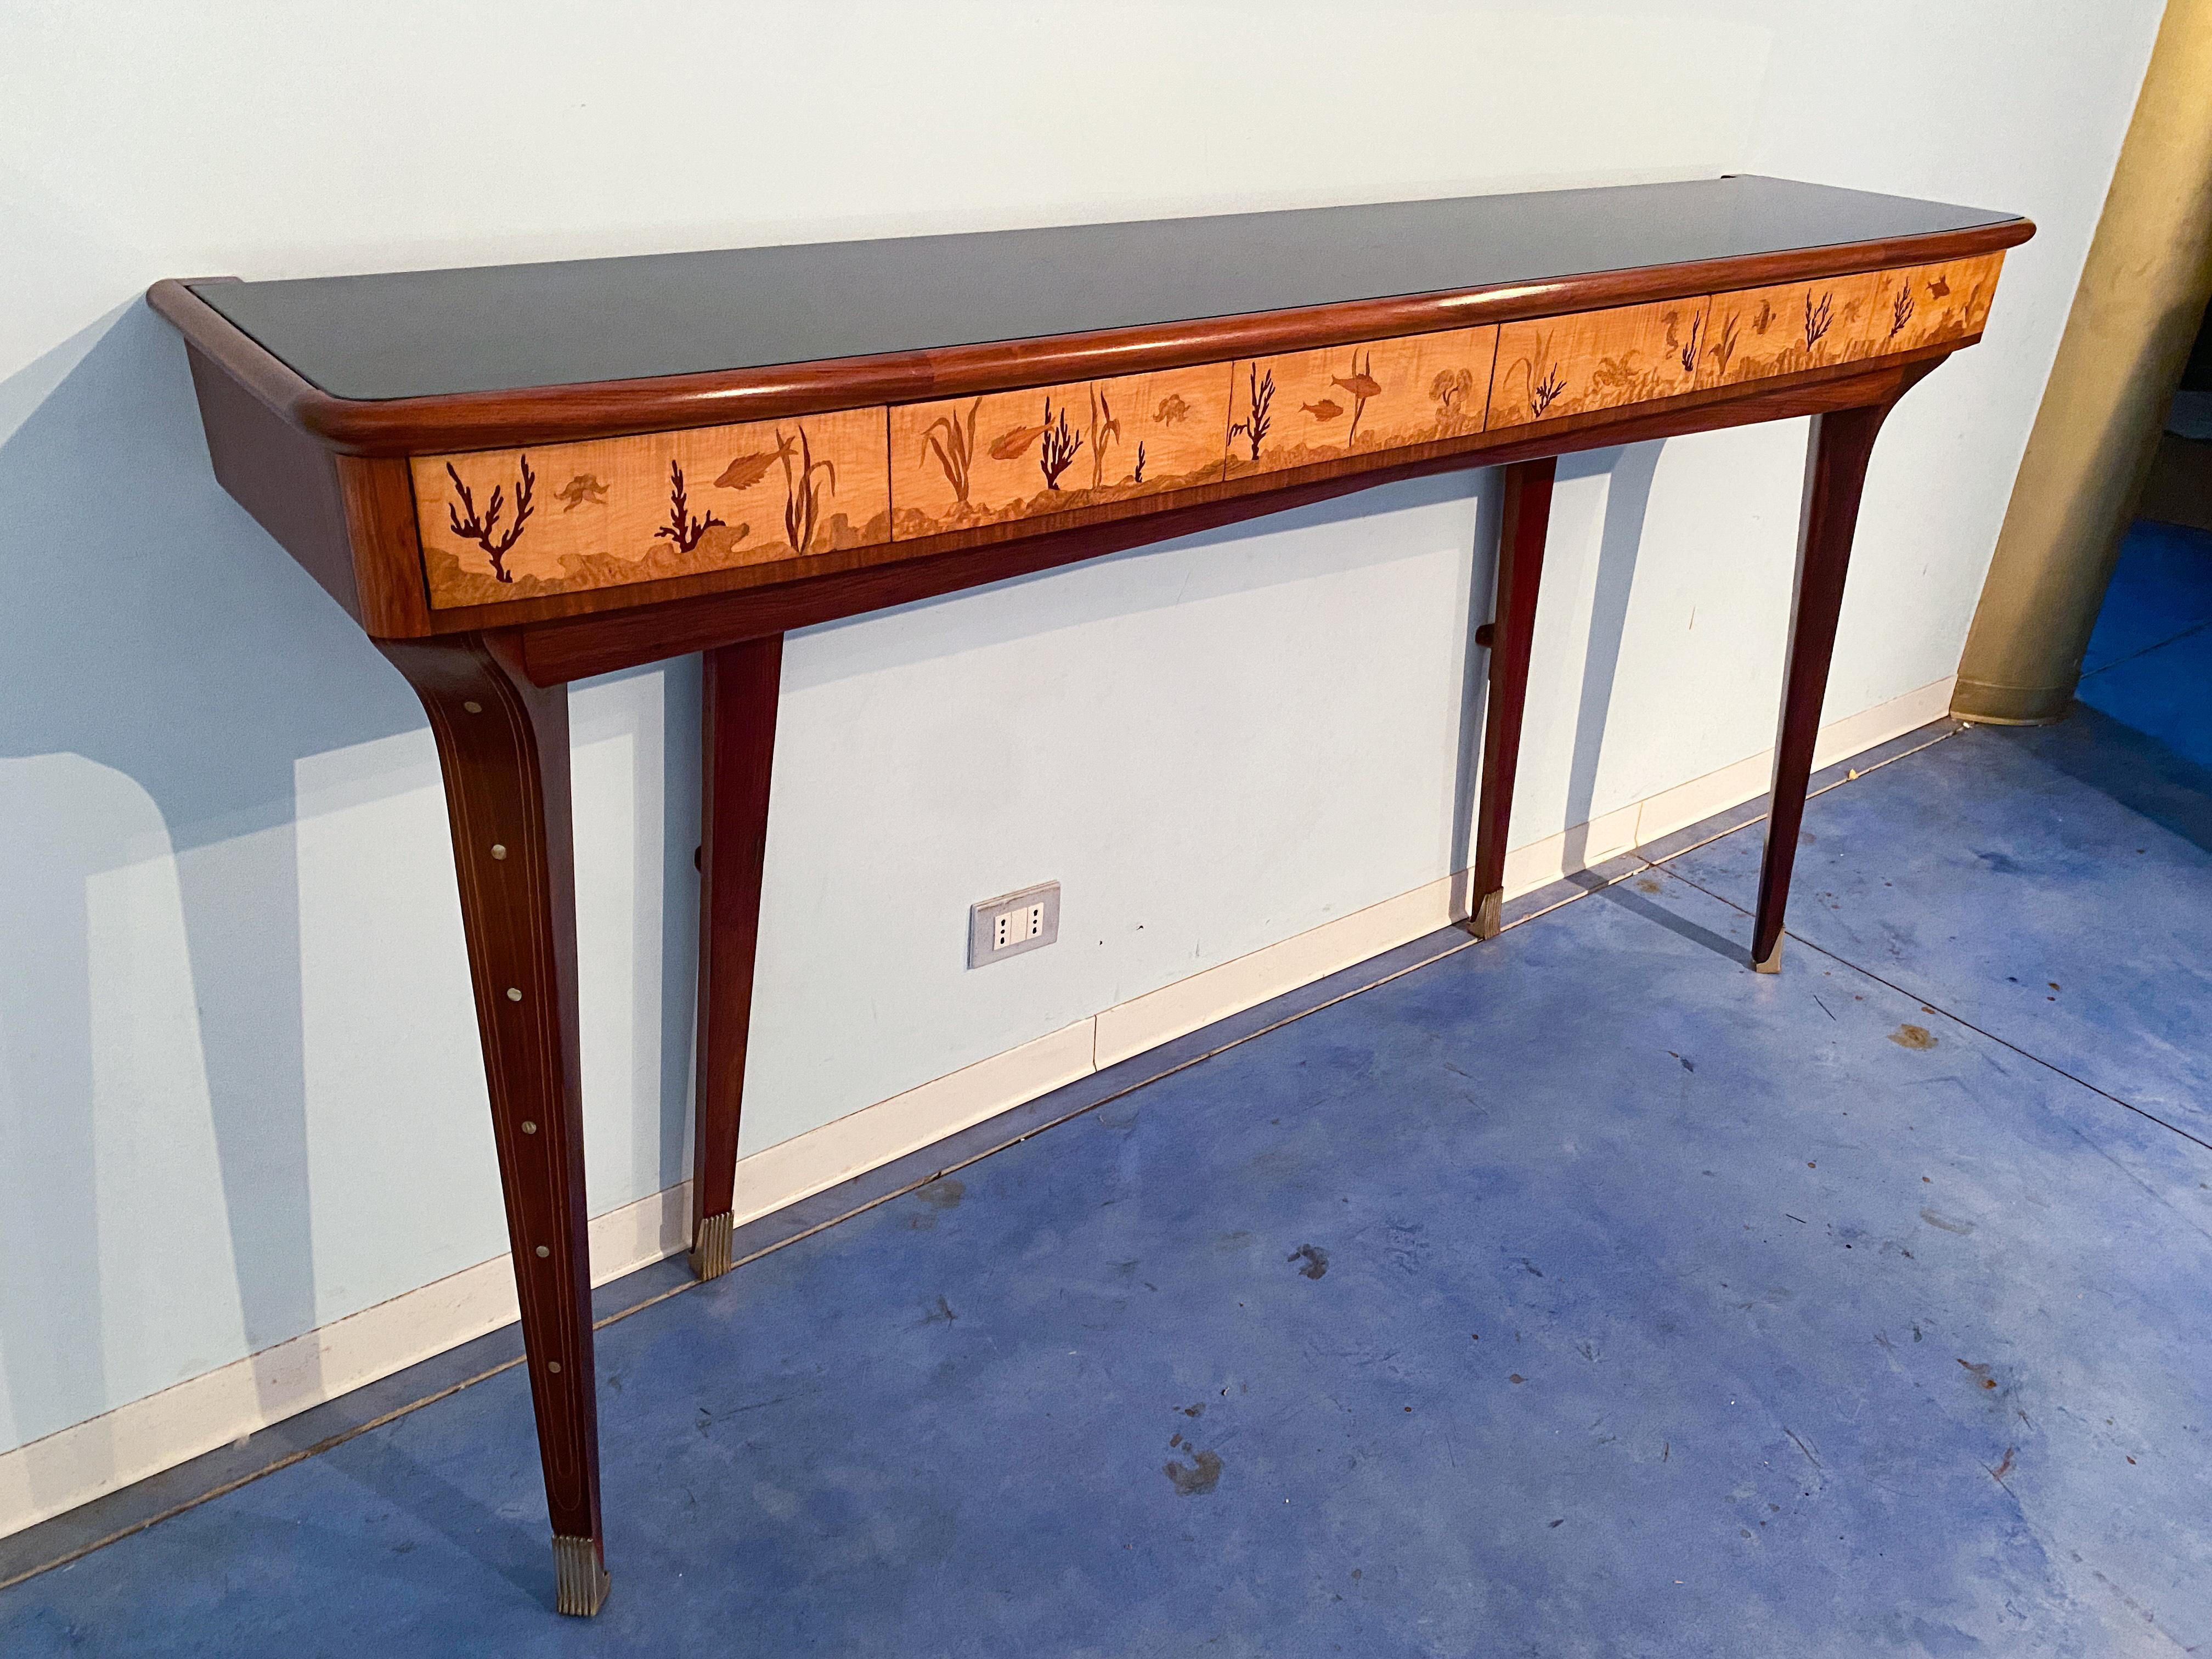 Italian Midcentury Inlaid Console with Mirror by Andrea Gusmai, 1950s For Sale 11